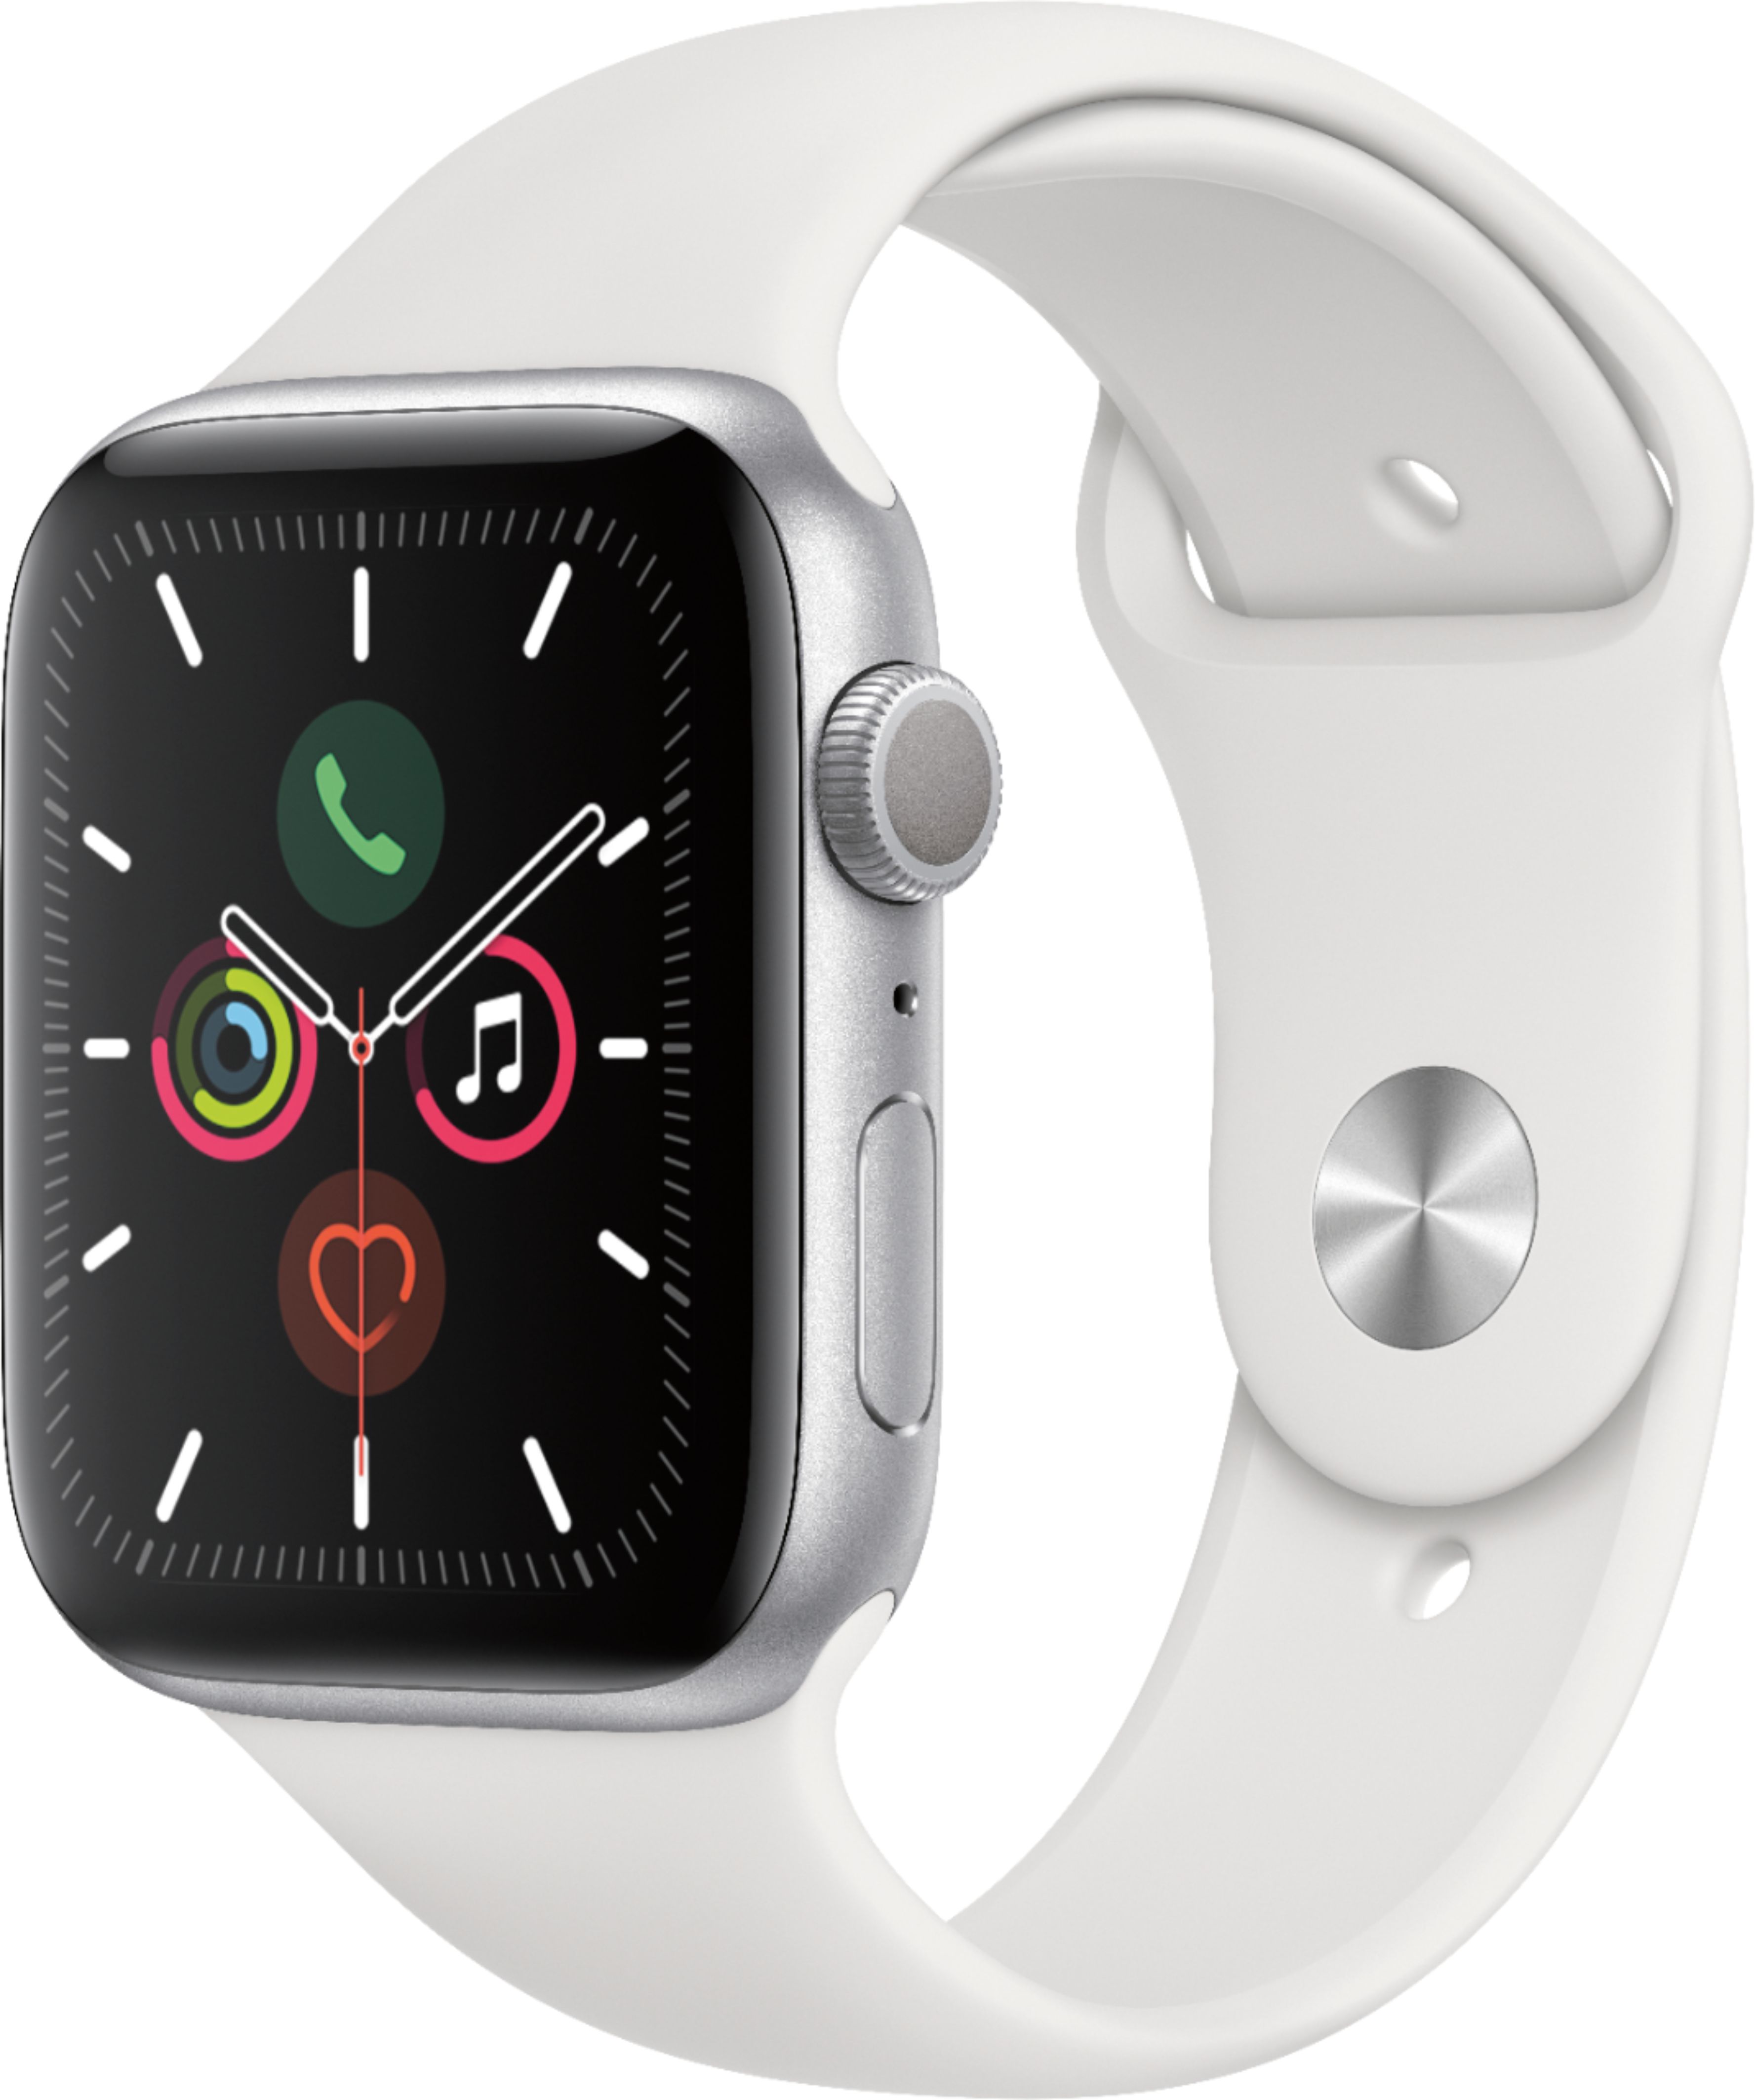 Apple Watch Series 5 (GPS) 44mm Silver Aluminum Case with White Sport Band - Silver Aluminum